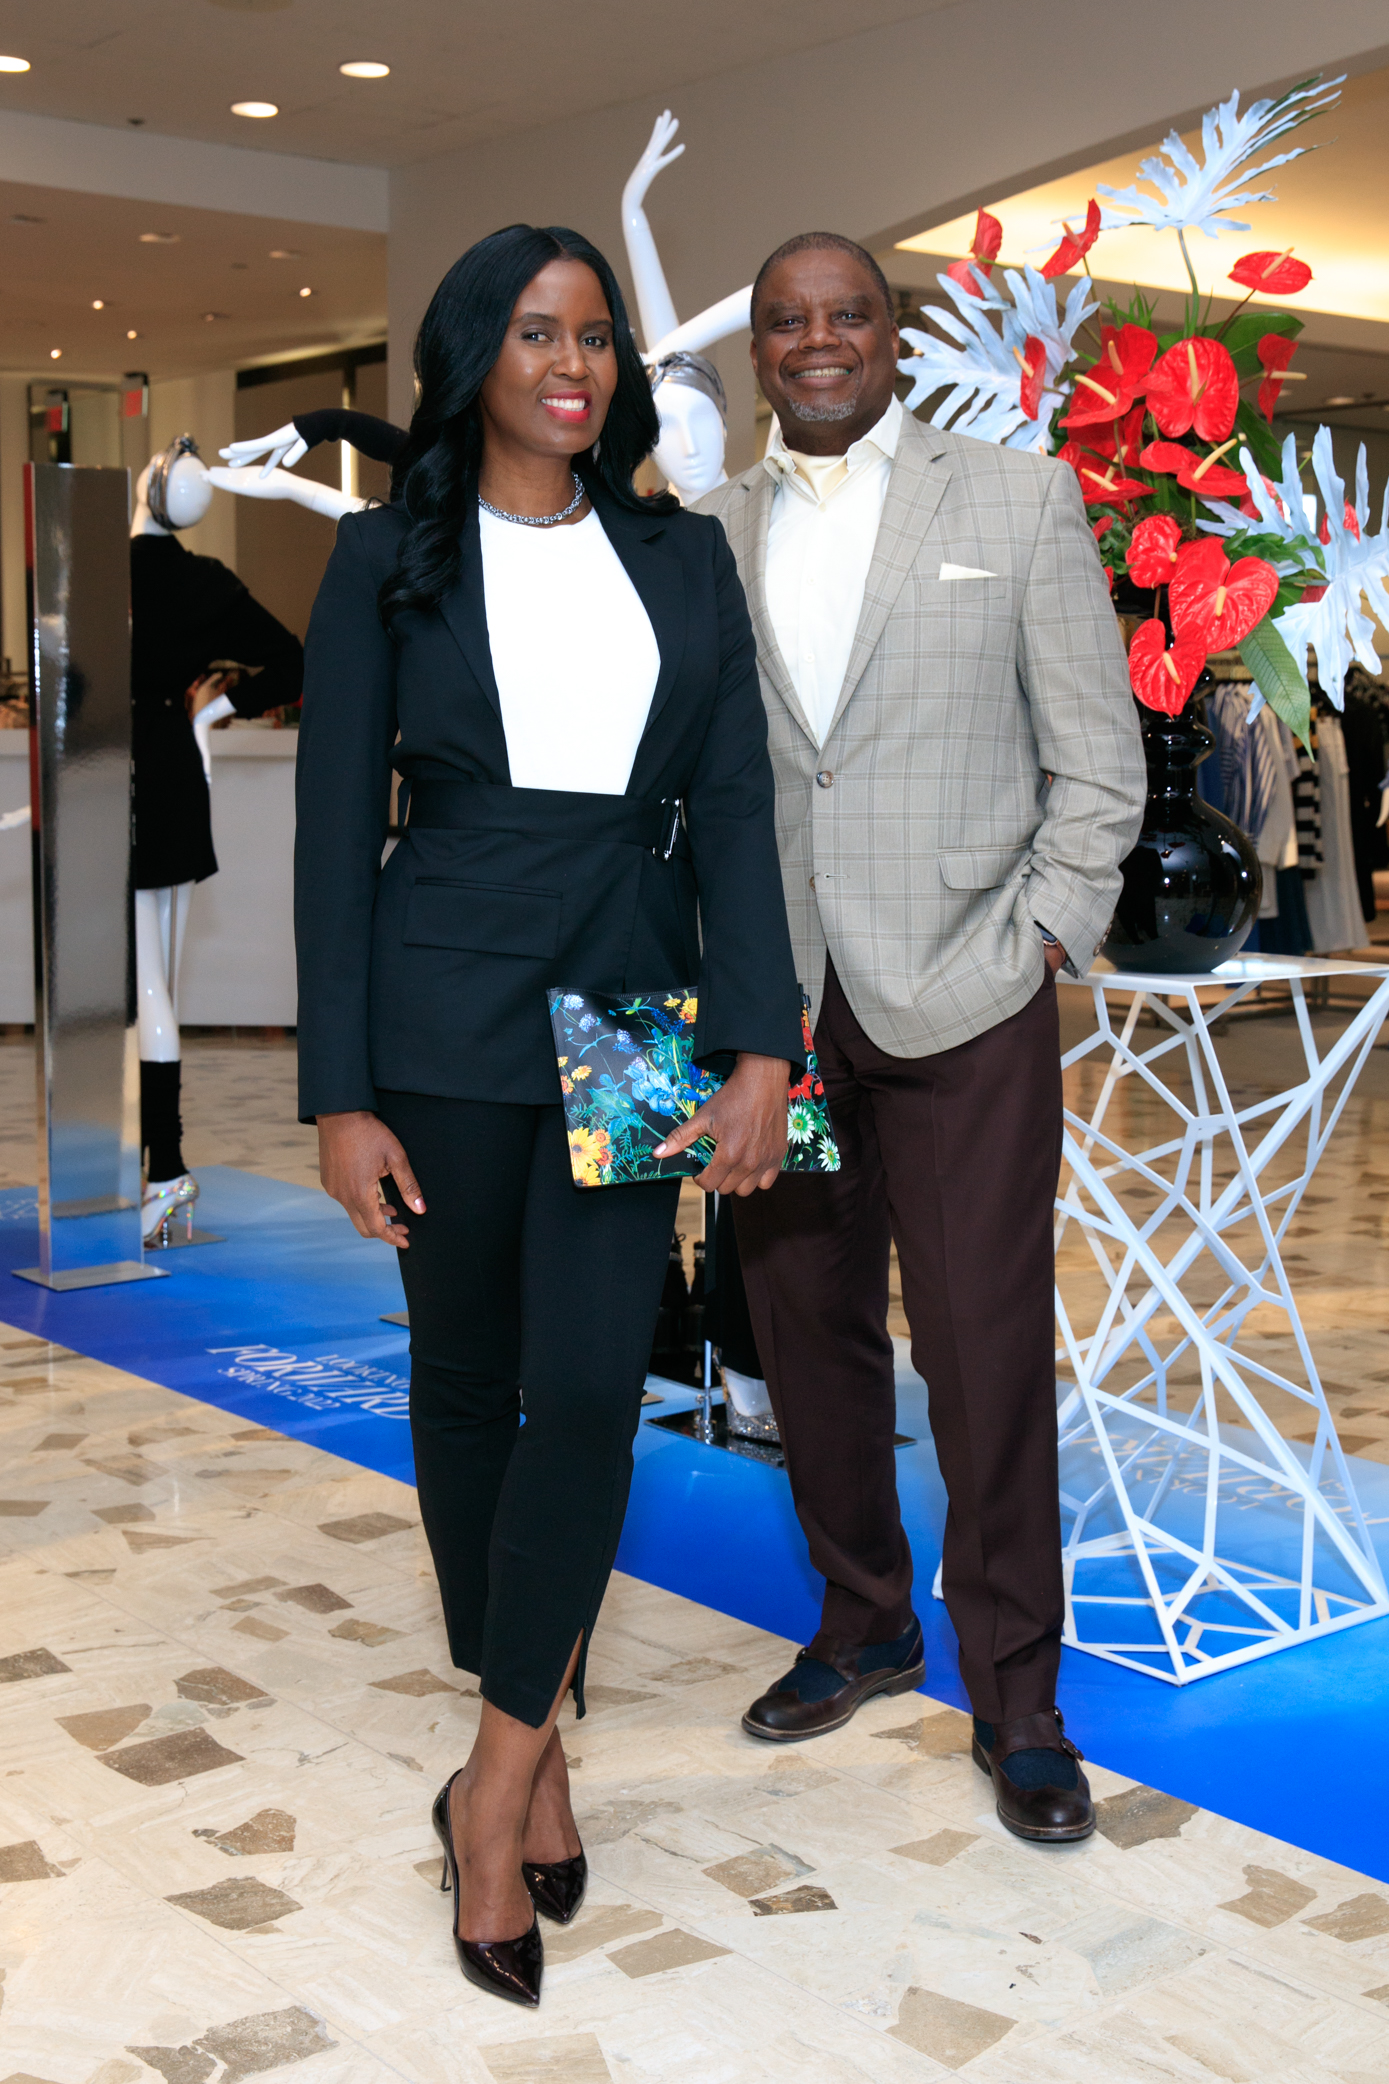 Neiman Marcus Celebrated Women's History Month with Exclusive Customer  Experiences in All 36 Stores